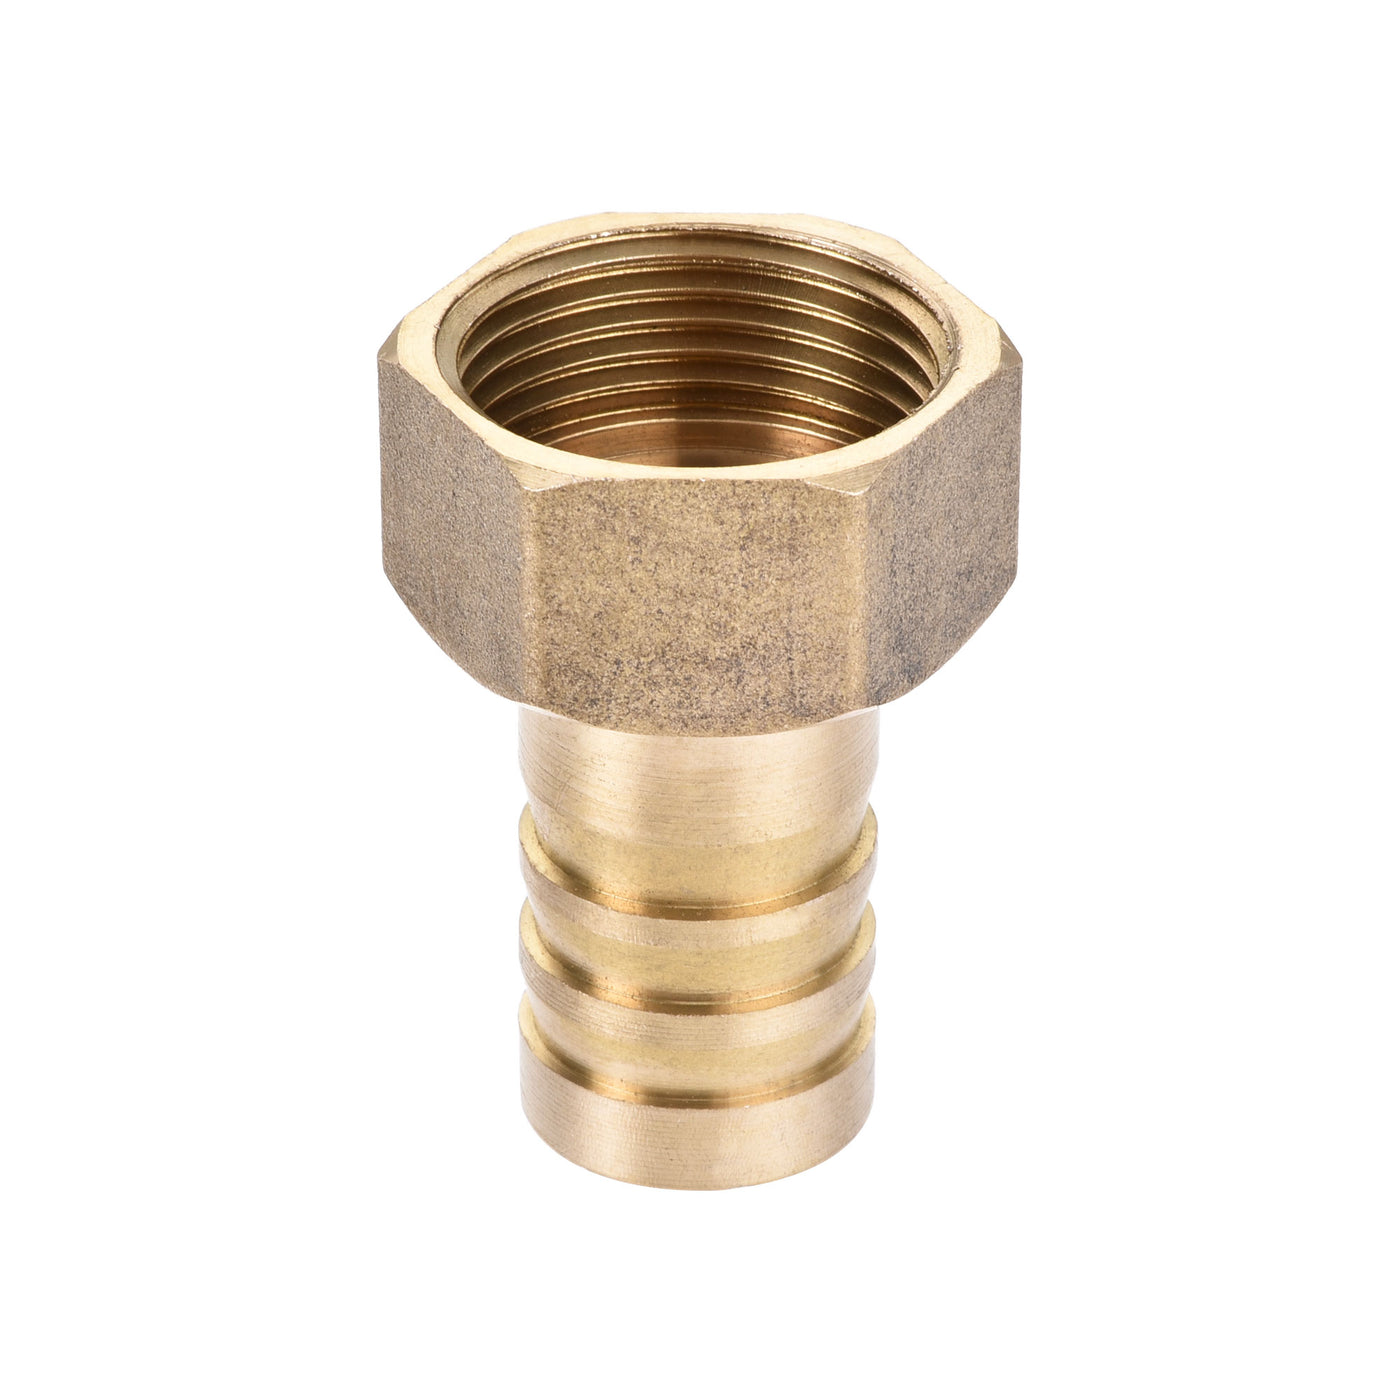 uxcell Uxcell Brass Barb Hose Fitting Connector Adapter 19mm Barbed x G3/4 Female Pipe with 16-25mm Hose Clamp 2Set